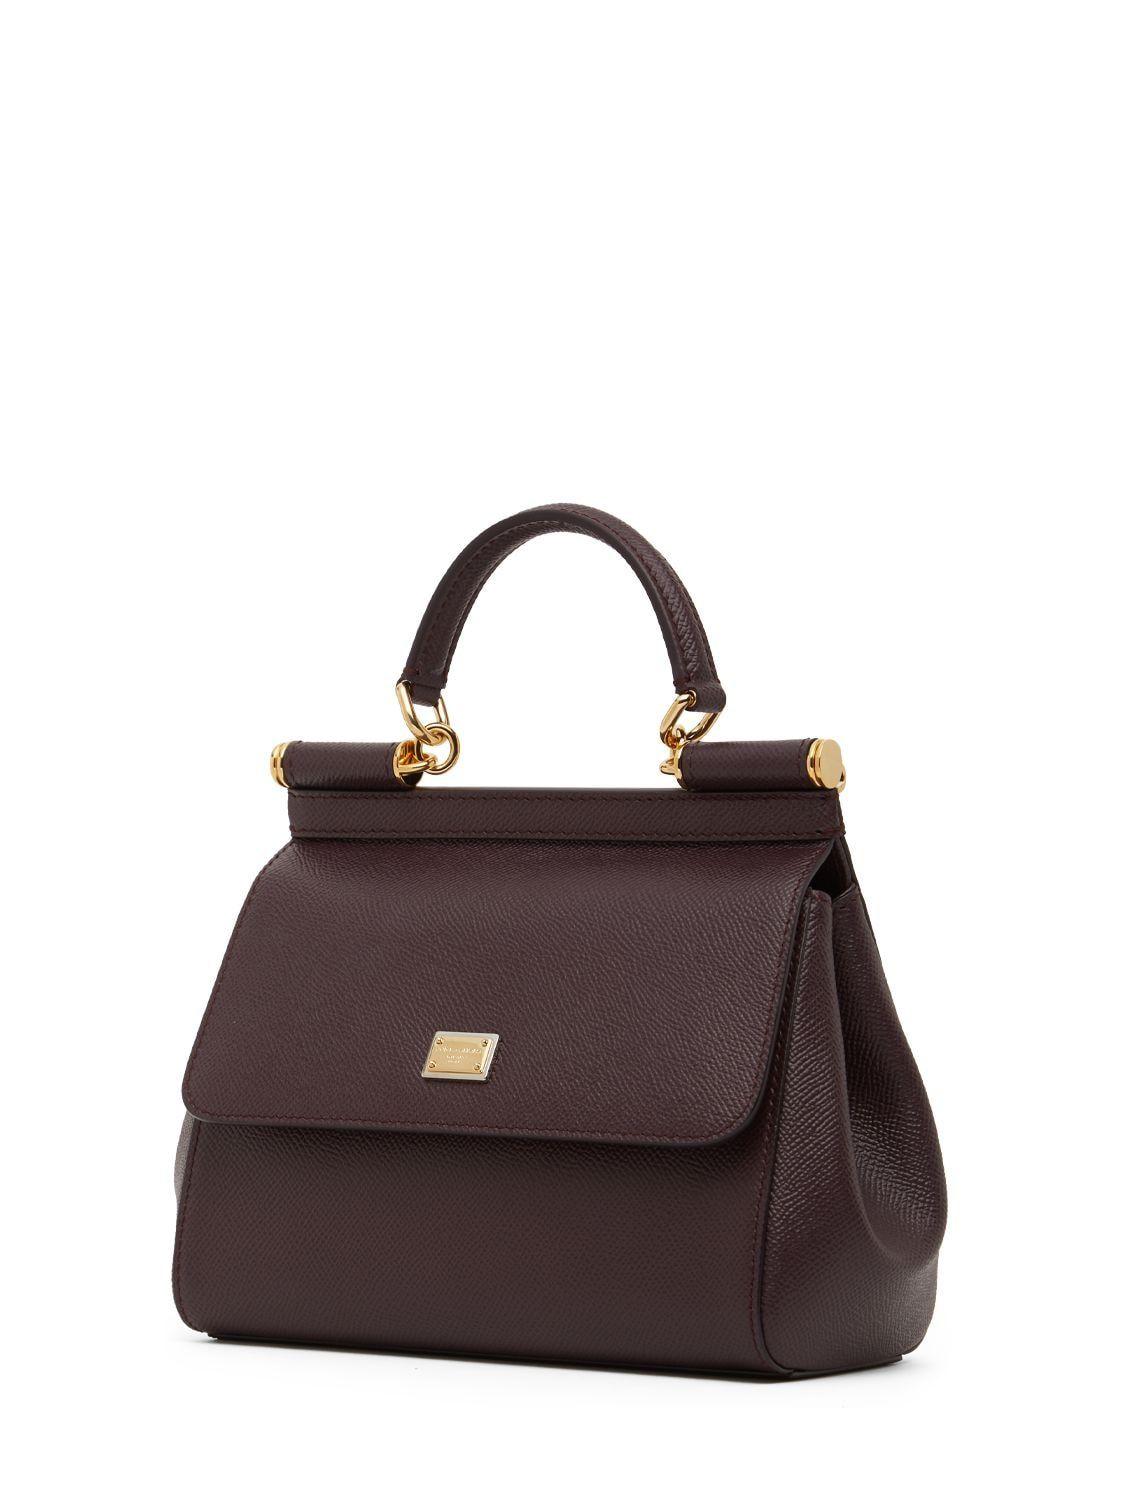 Dolce & Gabbana Dauphine New Sicily Top Handle Bag In Mosto